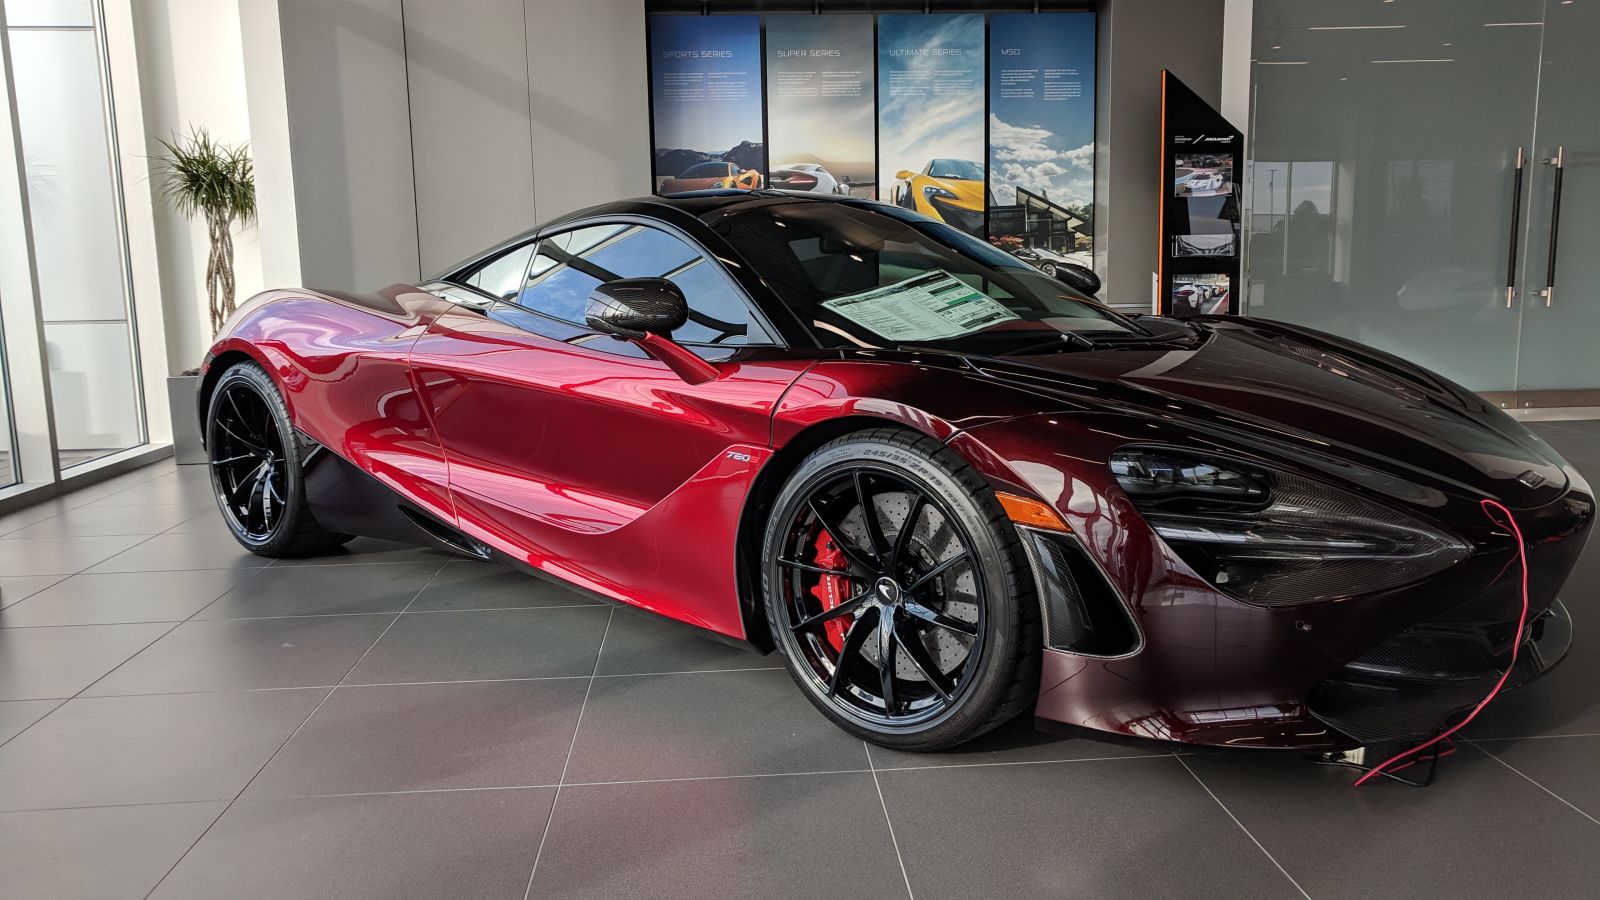 The Hypervelocity Red is a $78k color option